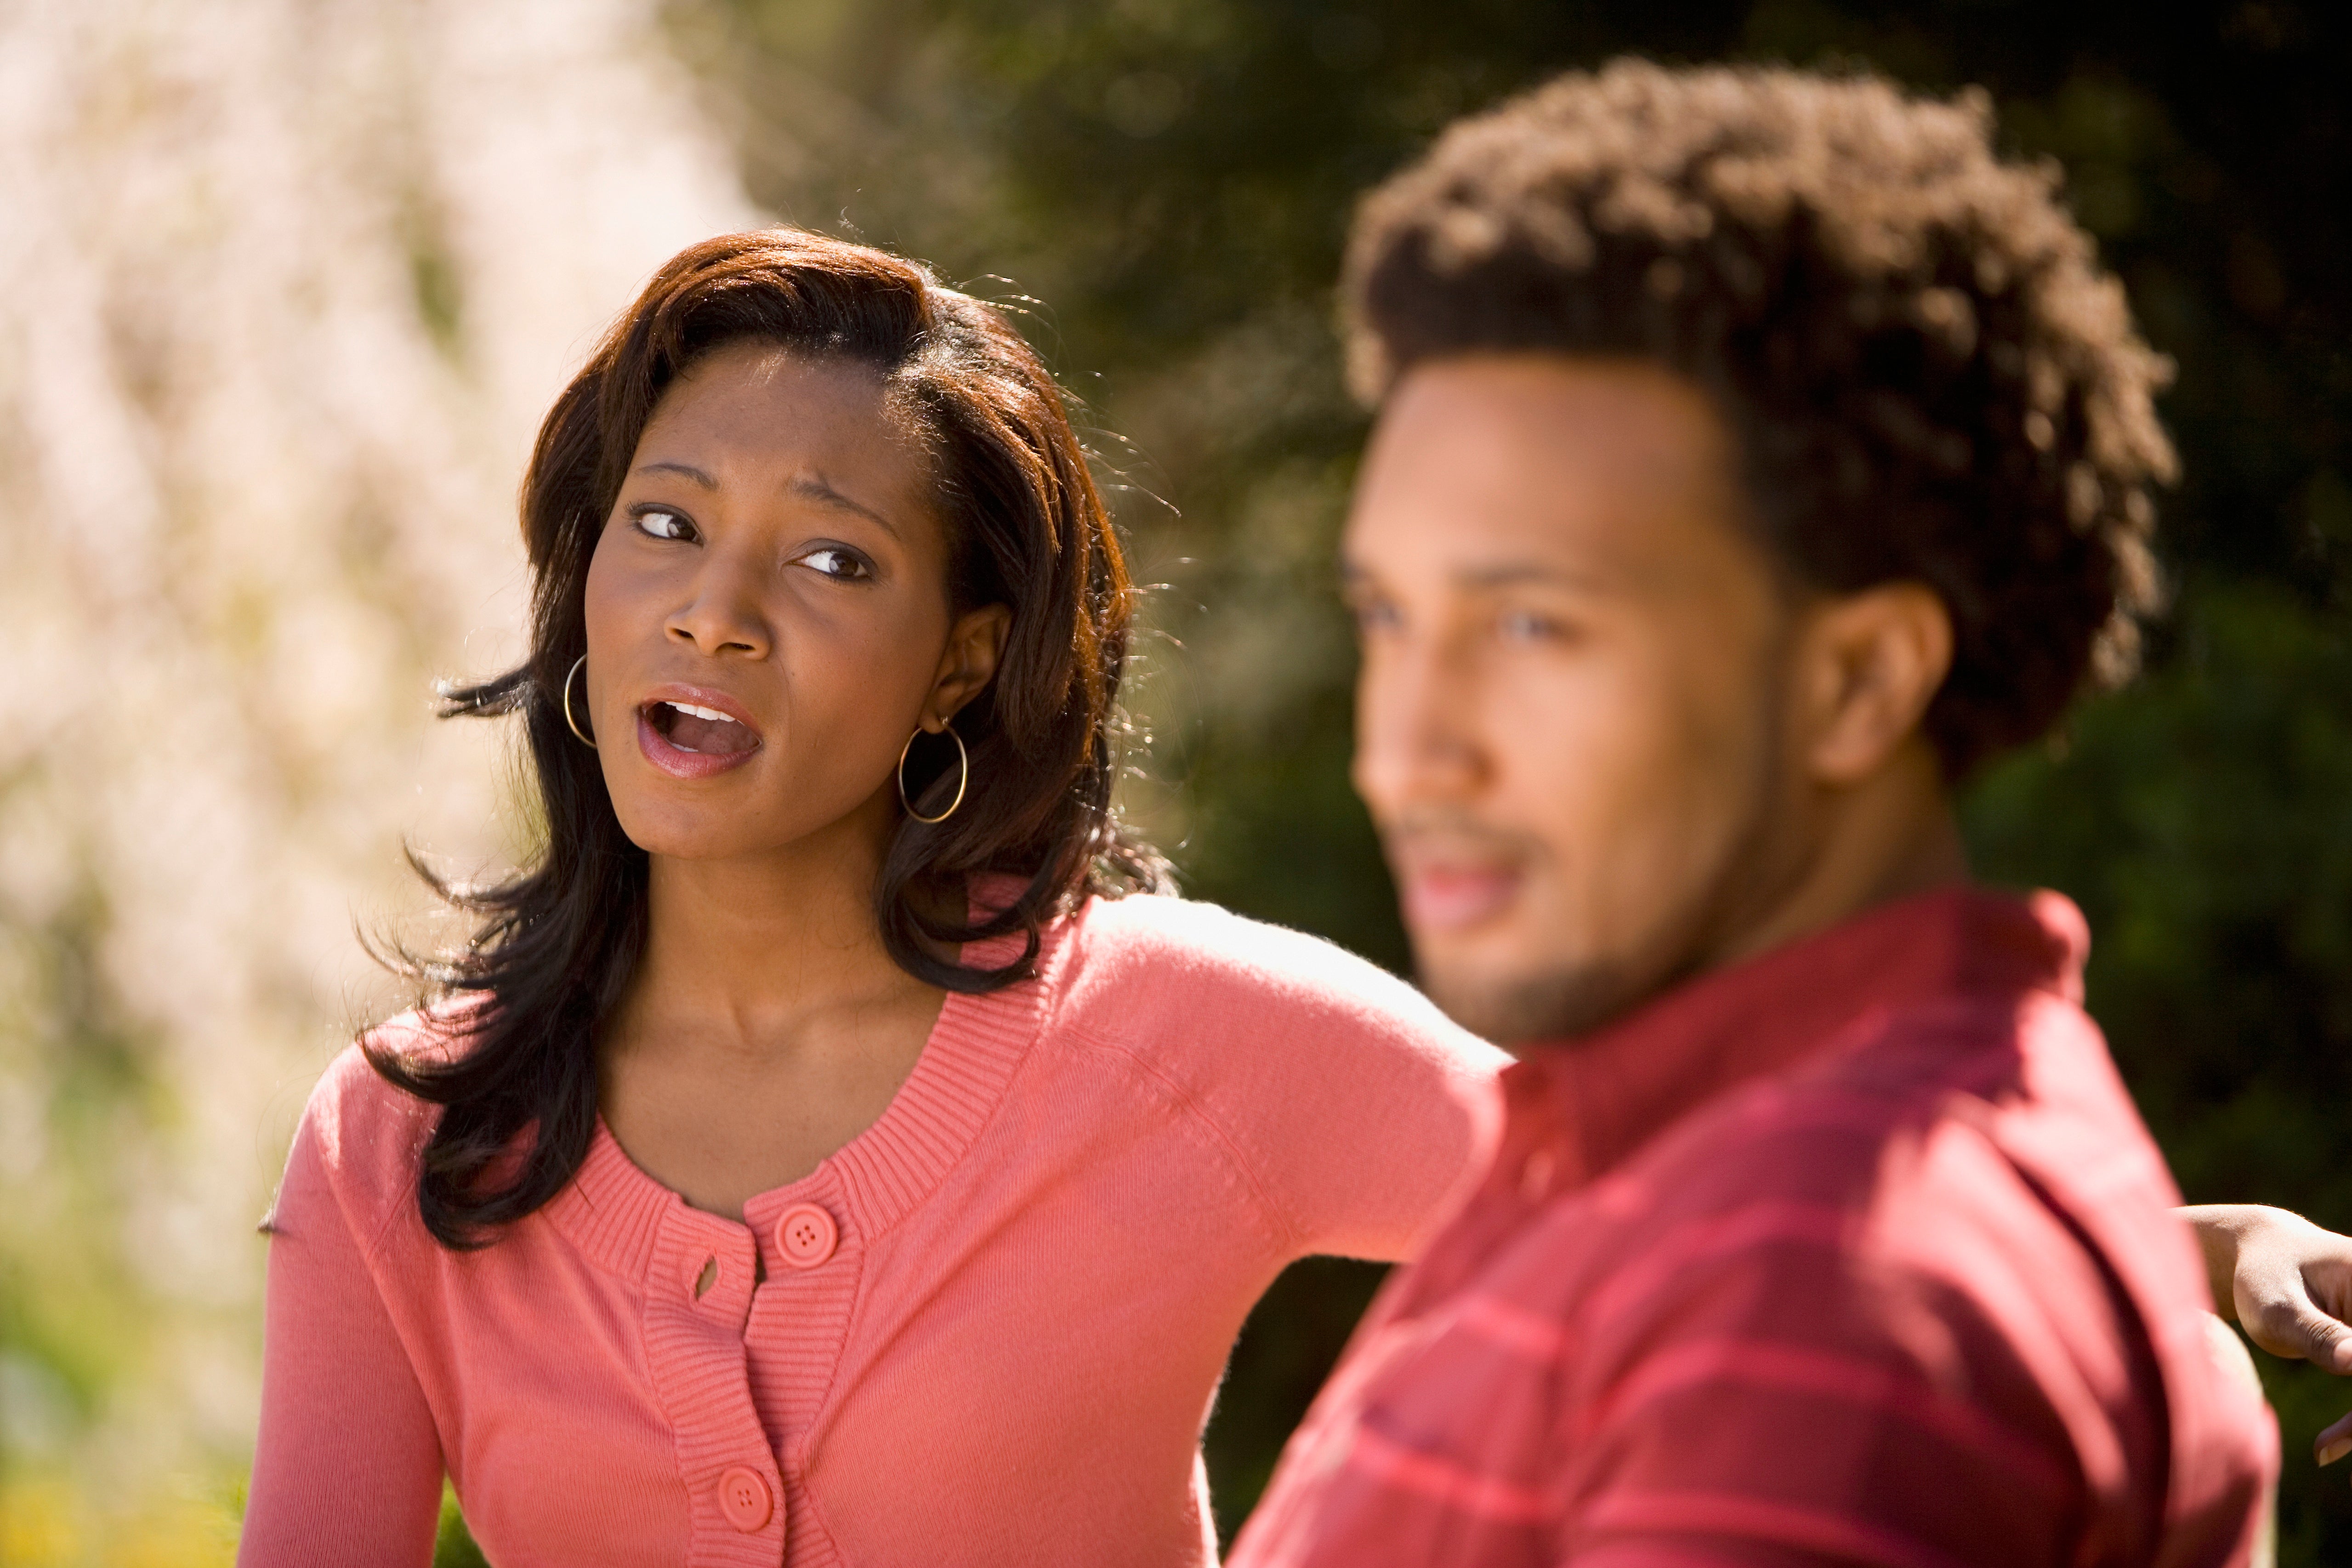 14 Things You Should Never (Ever!) Say To A Woman